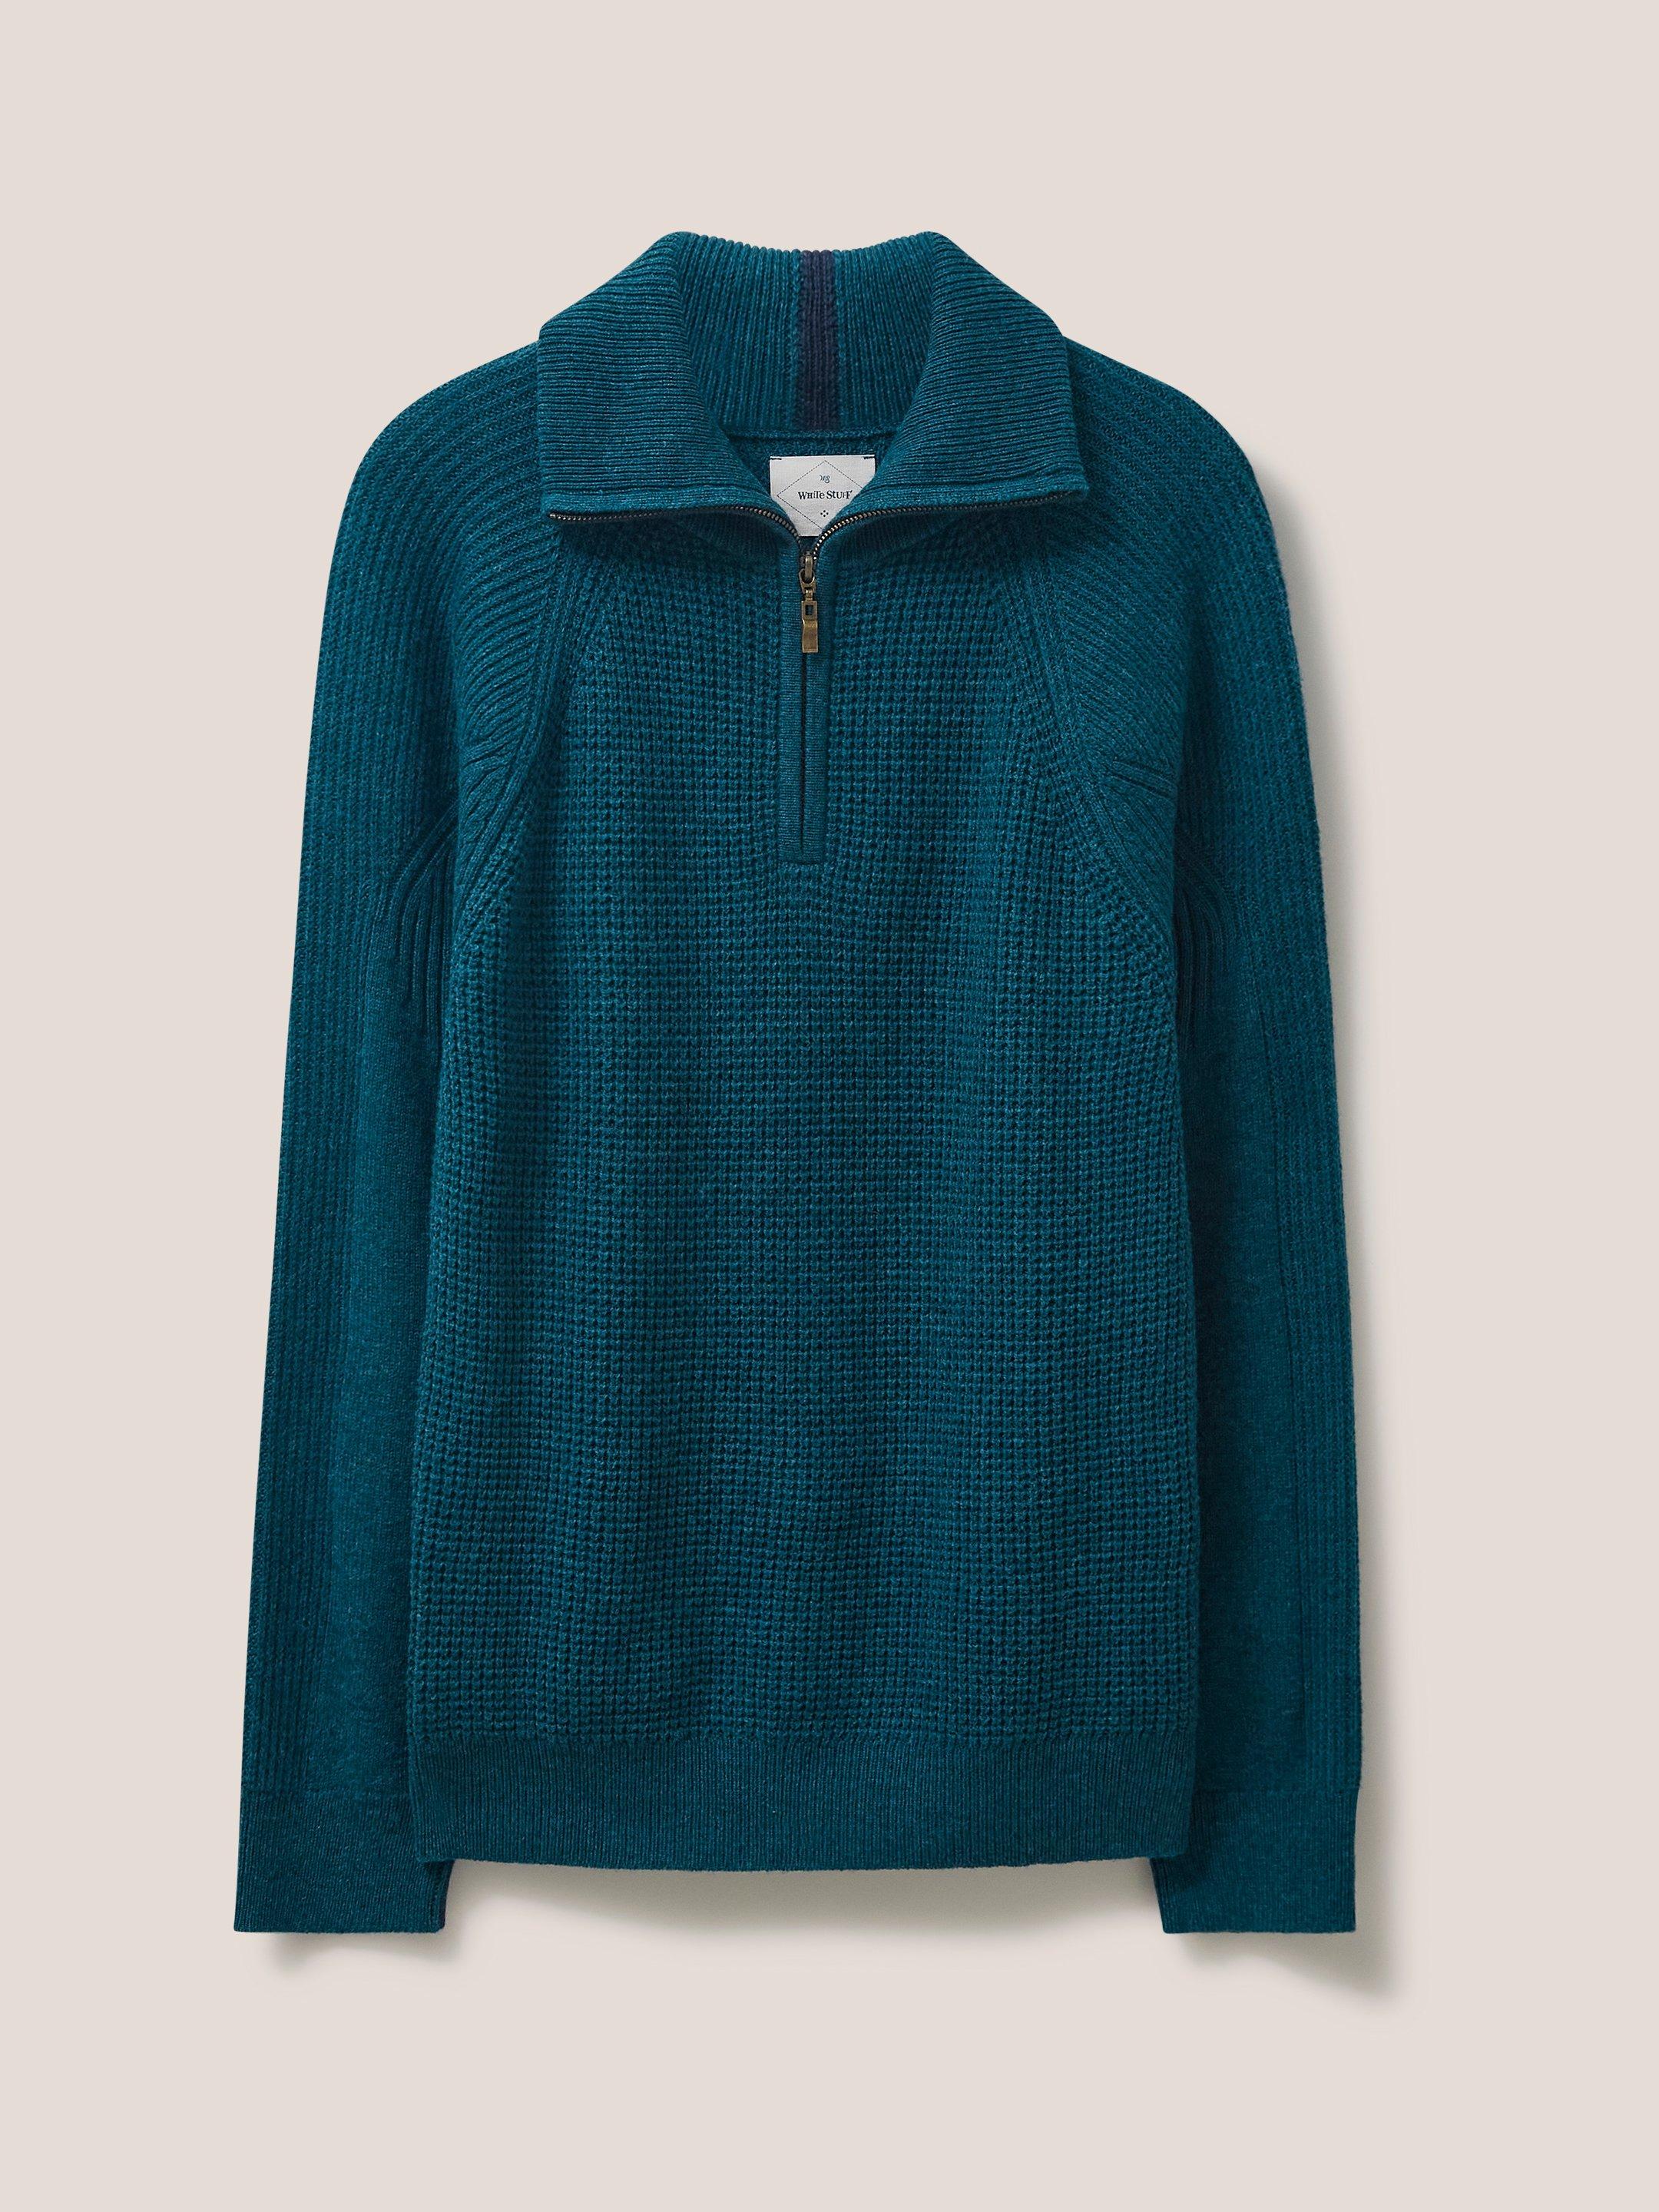 Mead Zip Neck Rib Jumper in MID TEAL - FLAT FRONT